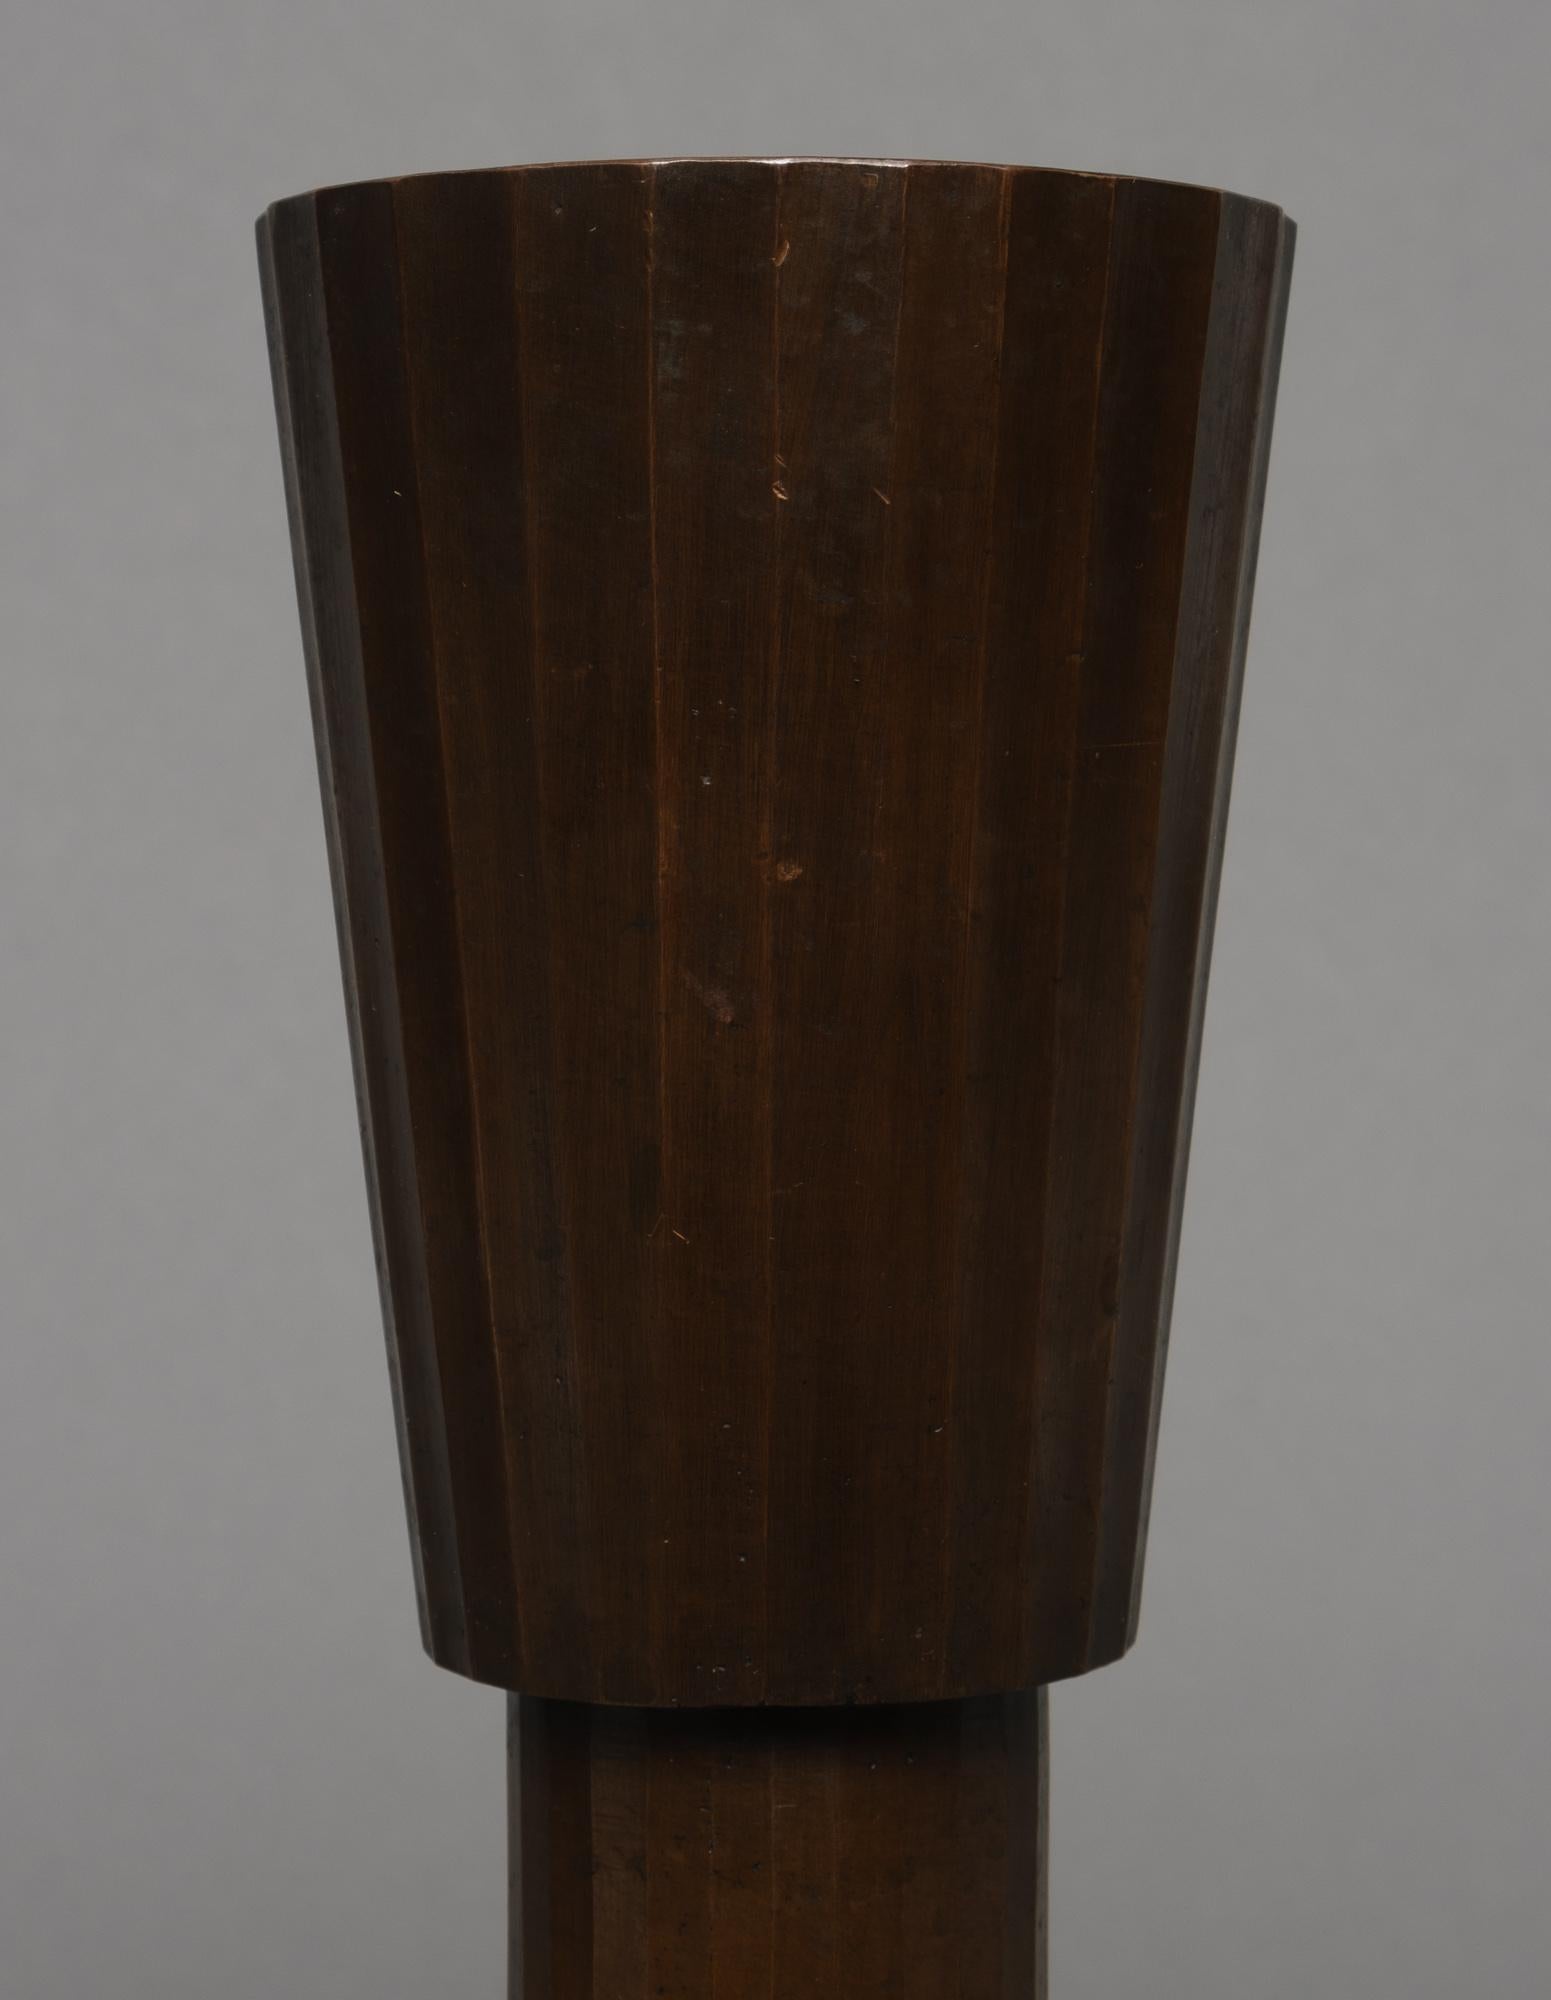 Striking dark brown patinated bronze vase in an hourglass shape with vertical ribs.
Cuppa-shaped insert on top with six concentric ridges.

When shipped we will add a certificate of authenticity.
Price including insured shipping.